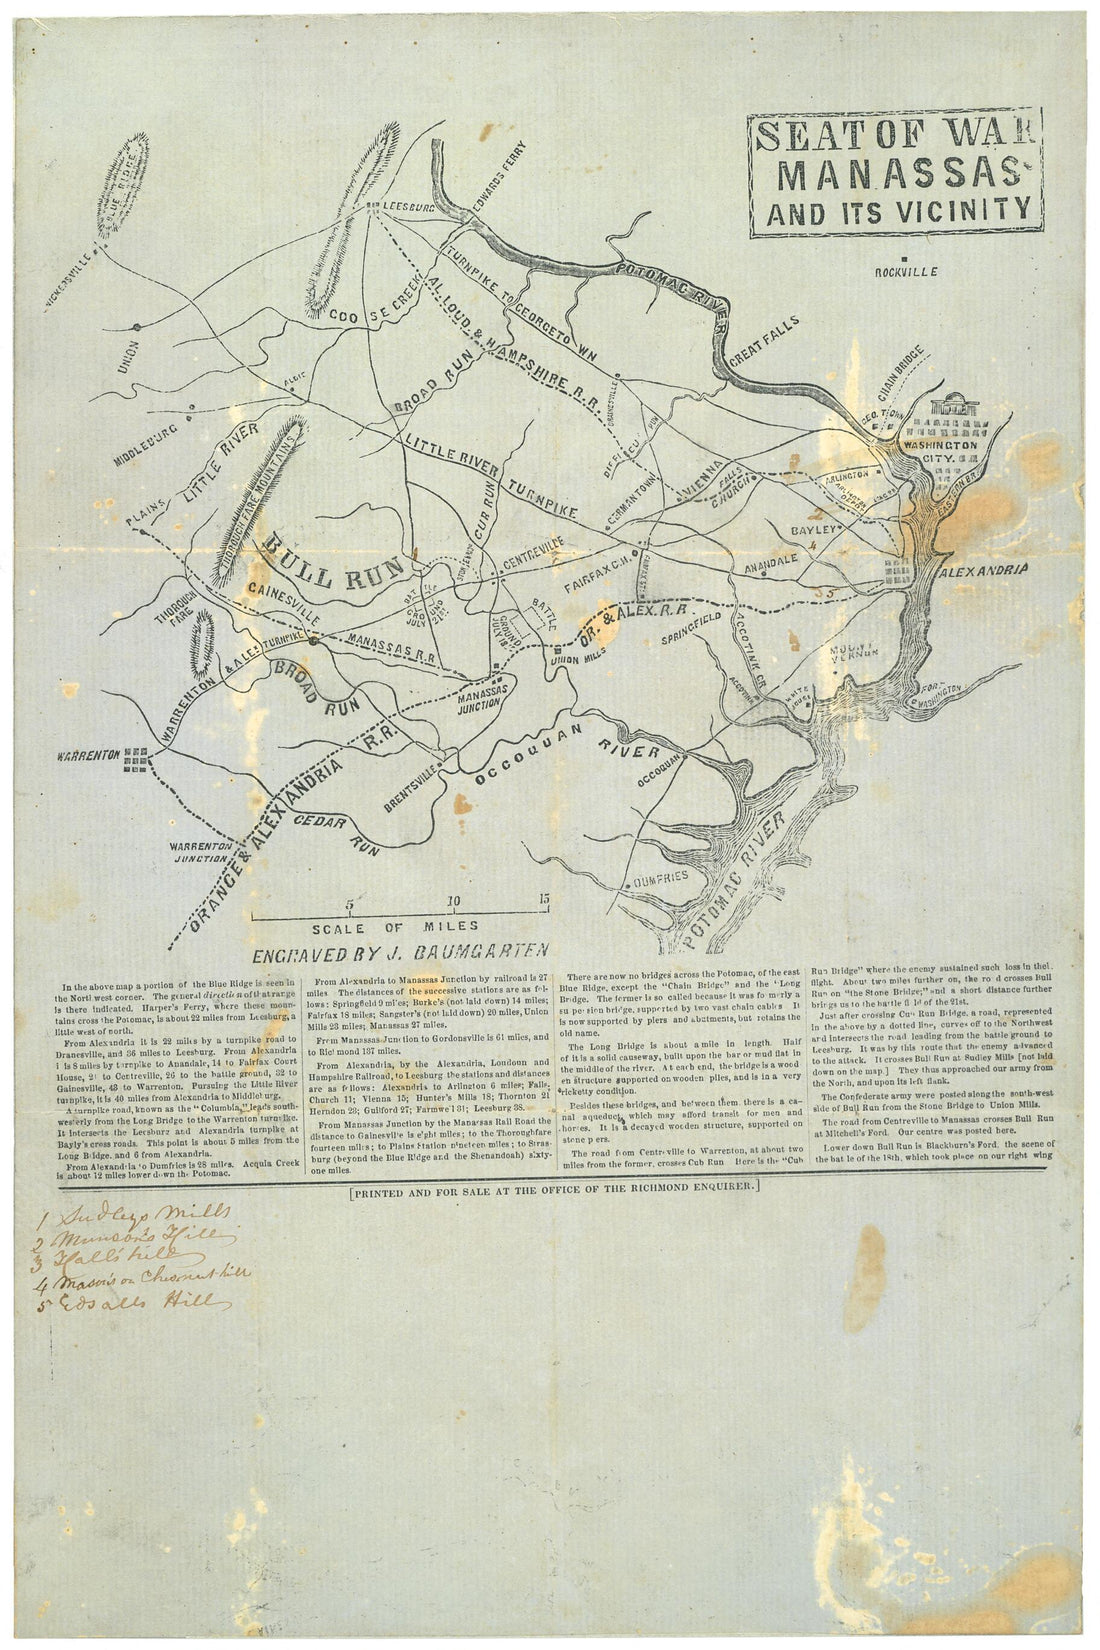 This old map of Seat of War, Manassas and Its Vicinity from 1861 was created by J. Baumgarten in 1861